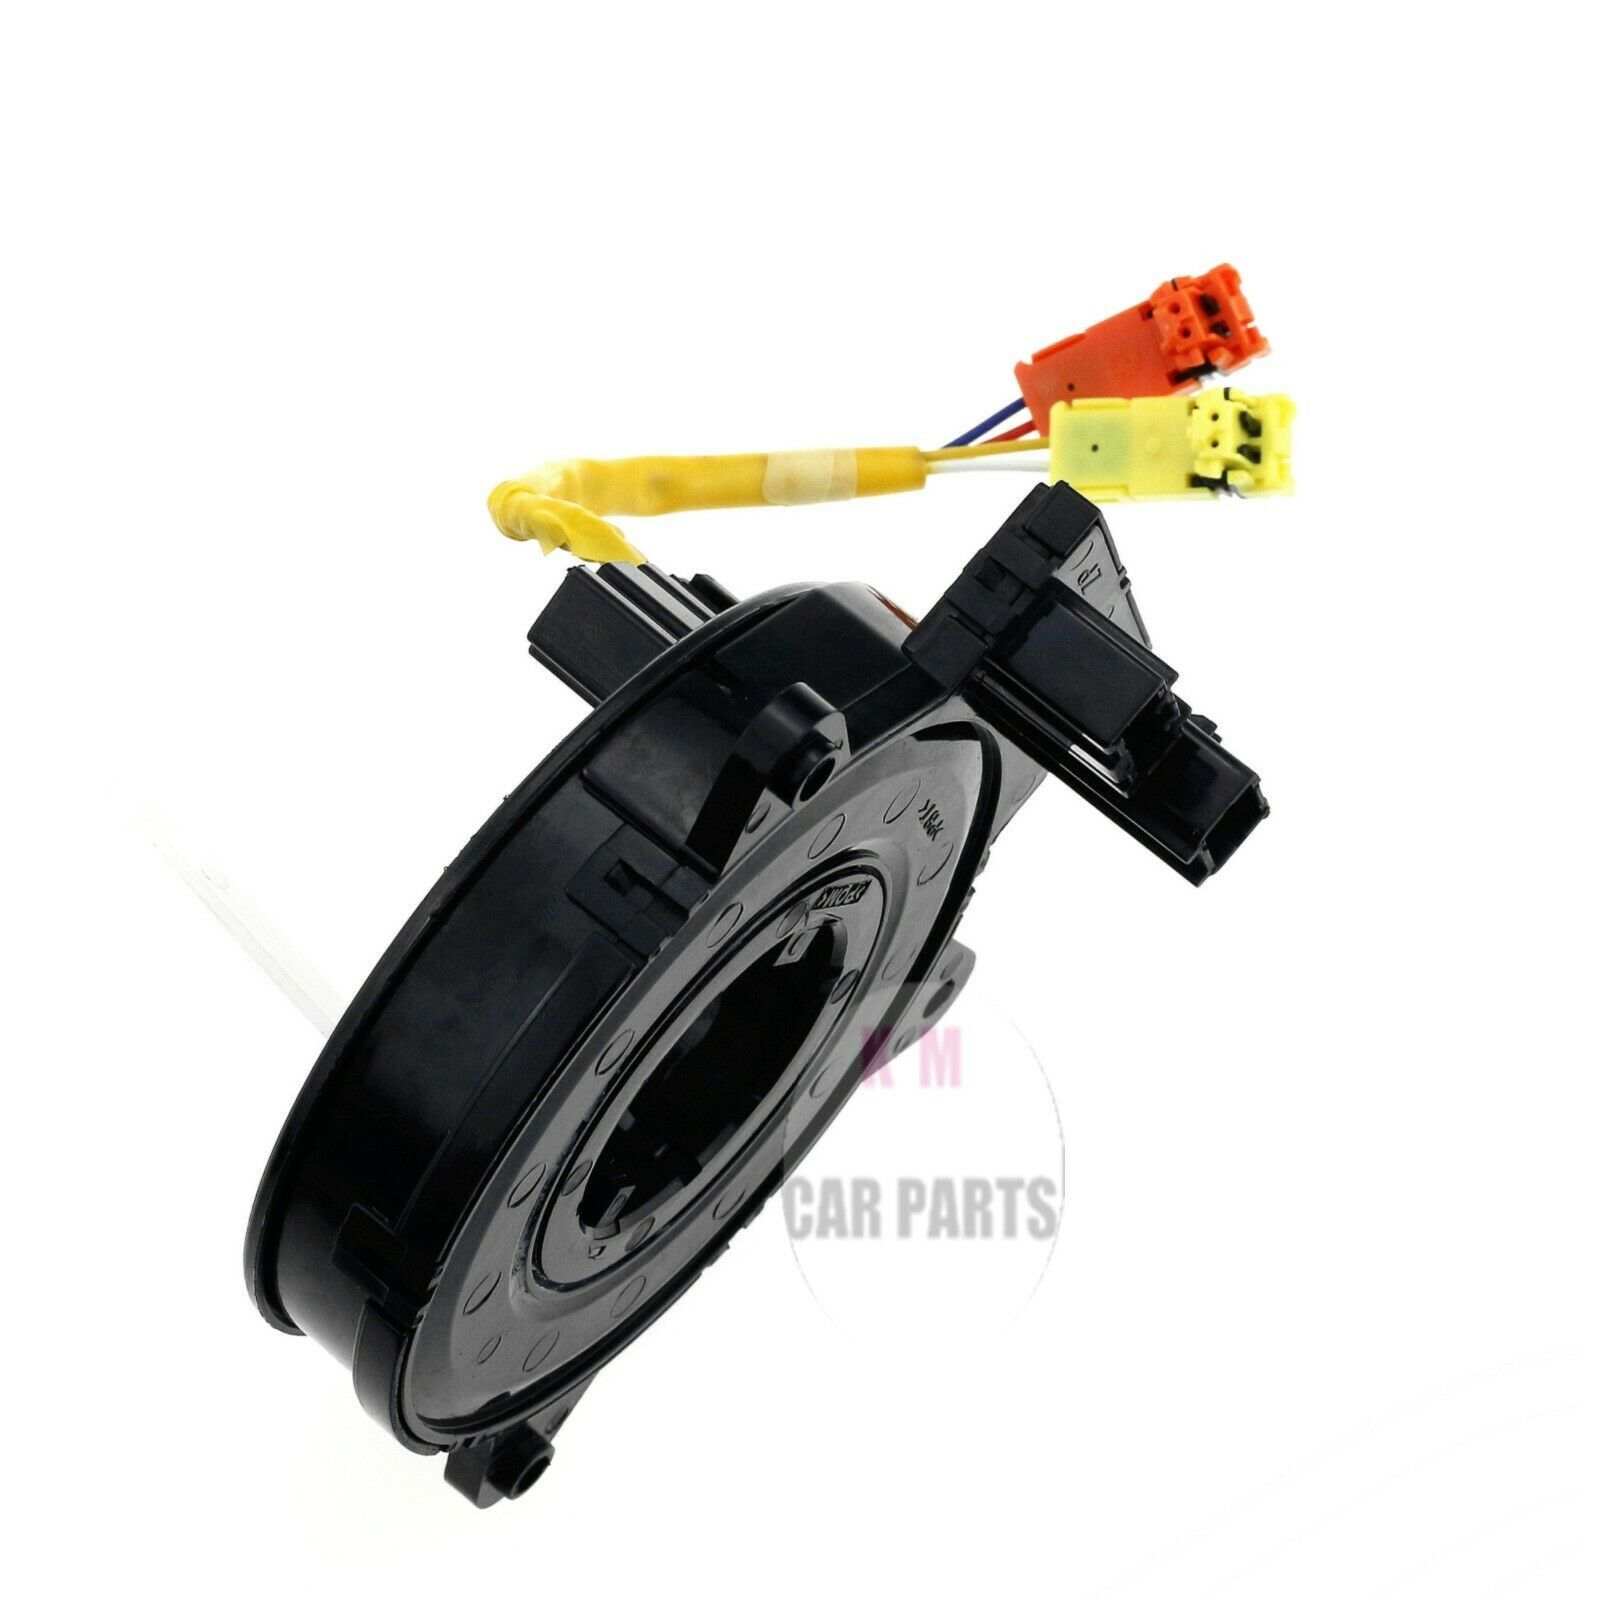 New Clock Spring Spiral Cable FA01-66CS0 Fit Mazda 6 CX-7 CX-9 RX-8 Speed 6 MX-5